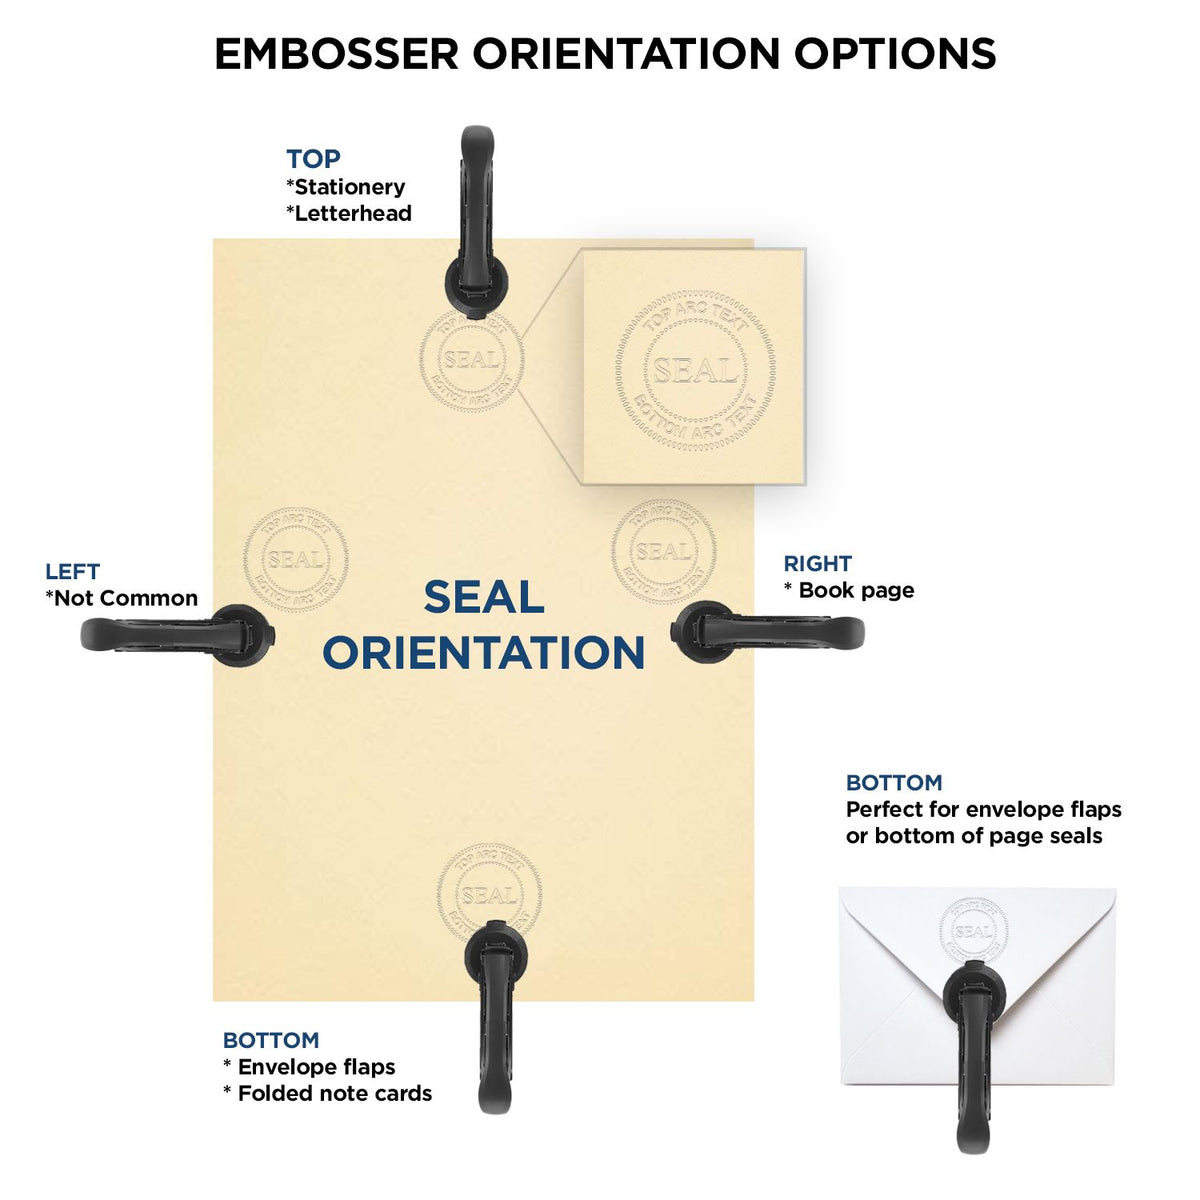 An infographic for the Gift New Jersey Geologist Seal showing embosser orientation, this is showing examples of a top, bottom, right and left insert.